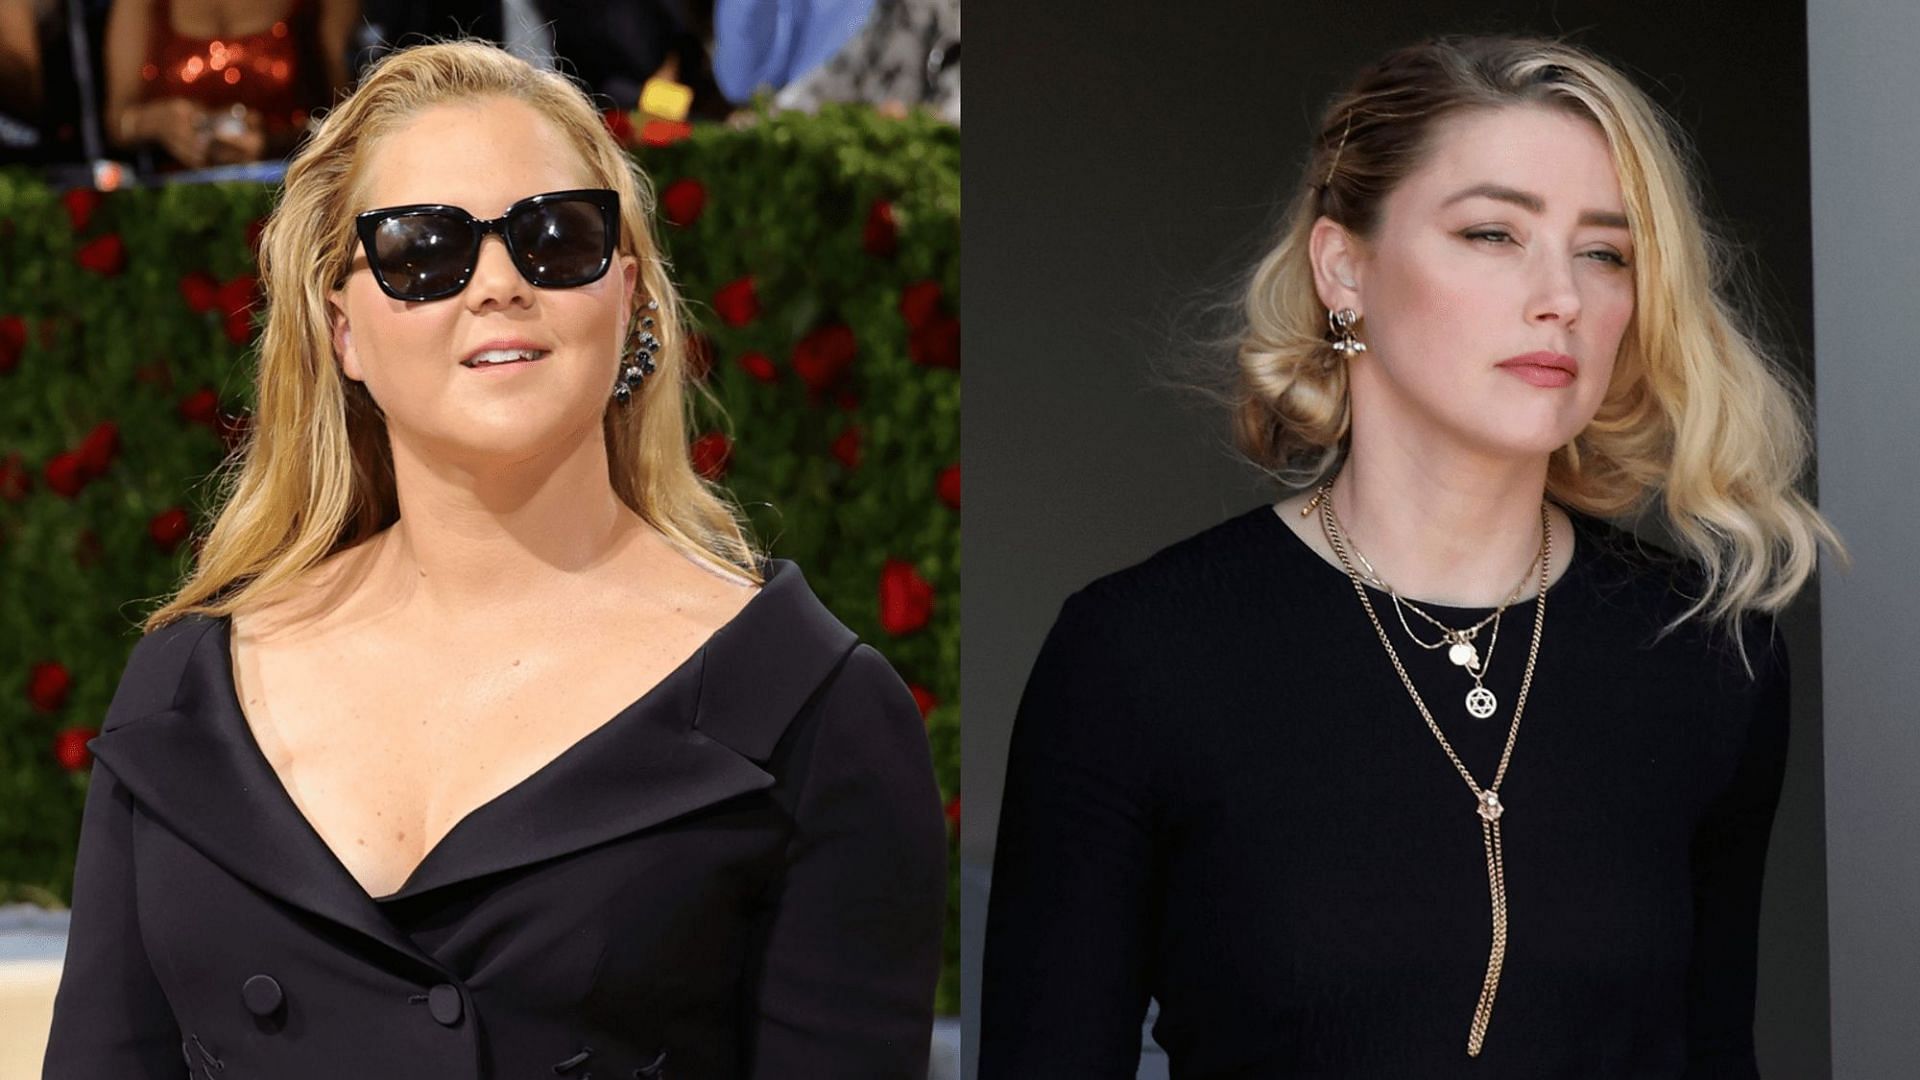 Amy Schumer deleted an Instagram post where she showed support to Amber Heard (Image via Getty Images)